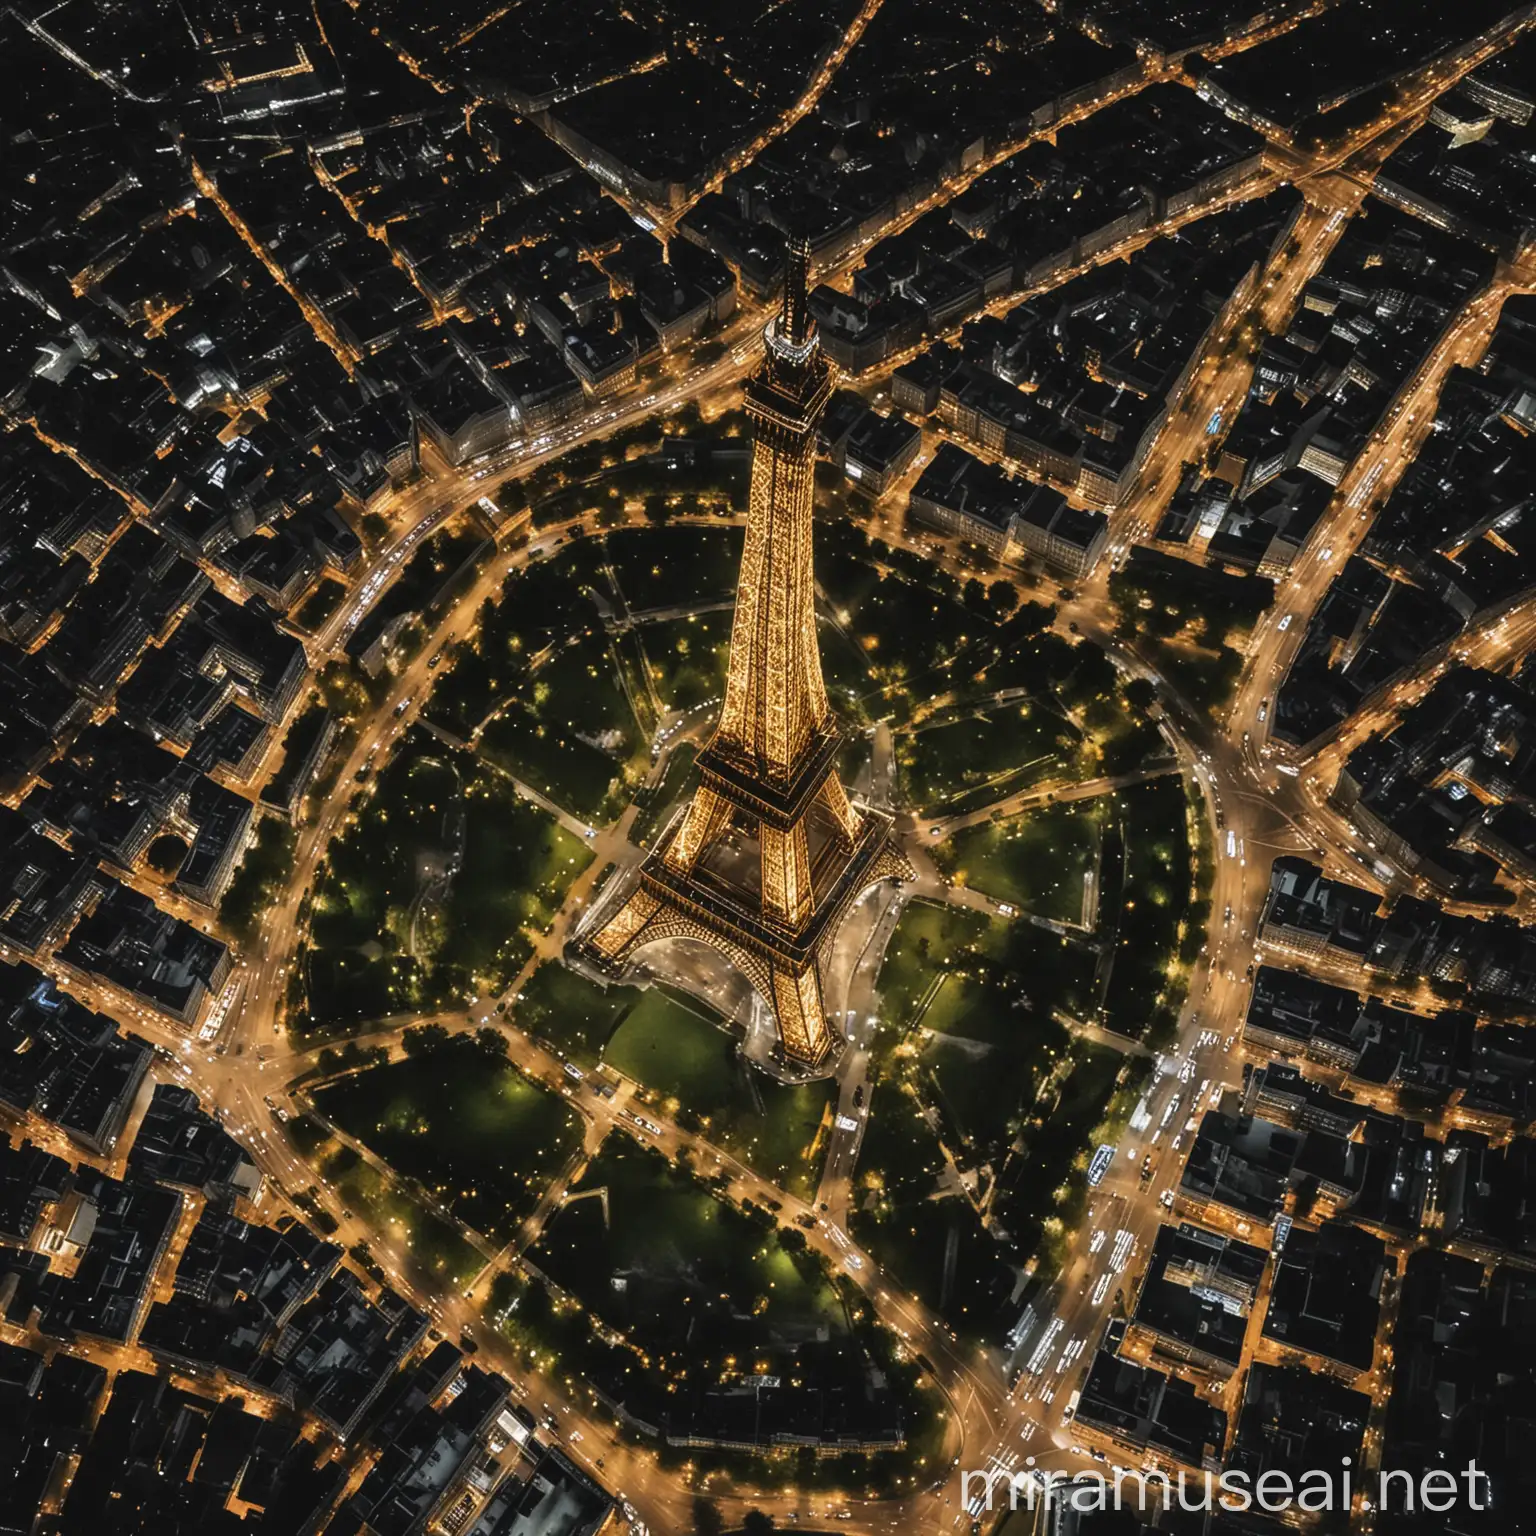 Nighttime Aerial View of the Eiffel Tower